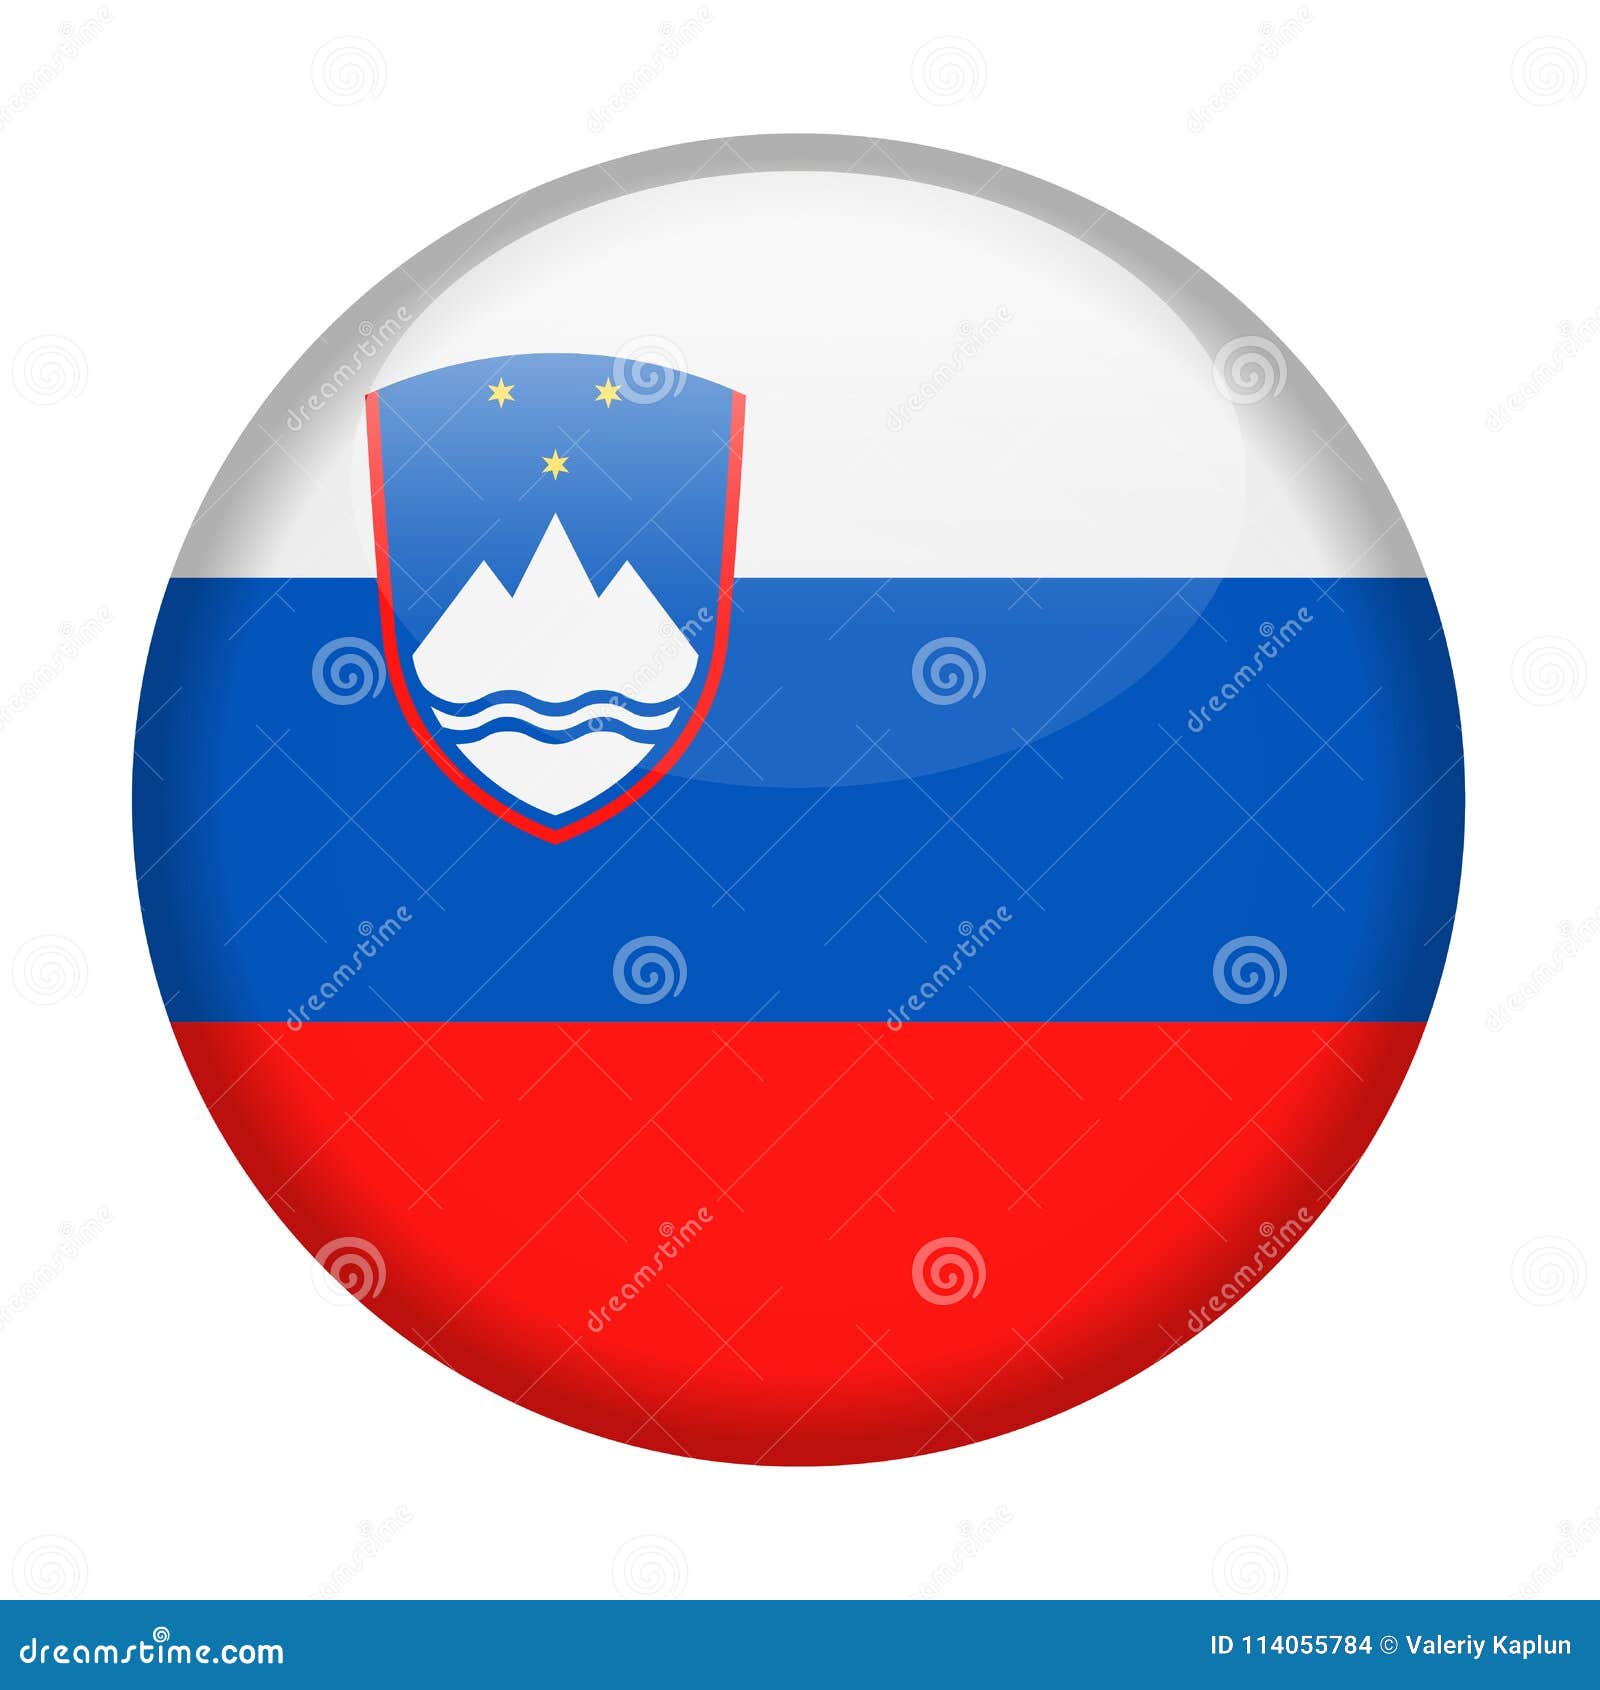 Russia Round Flag Vector Flat Icon Stock Illustration - Download